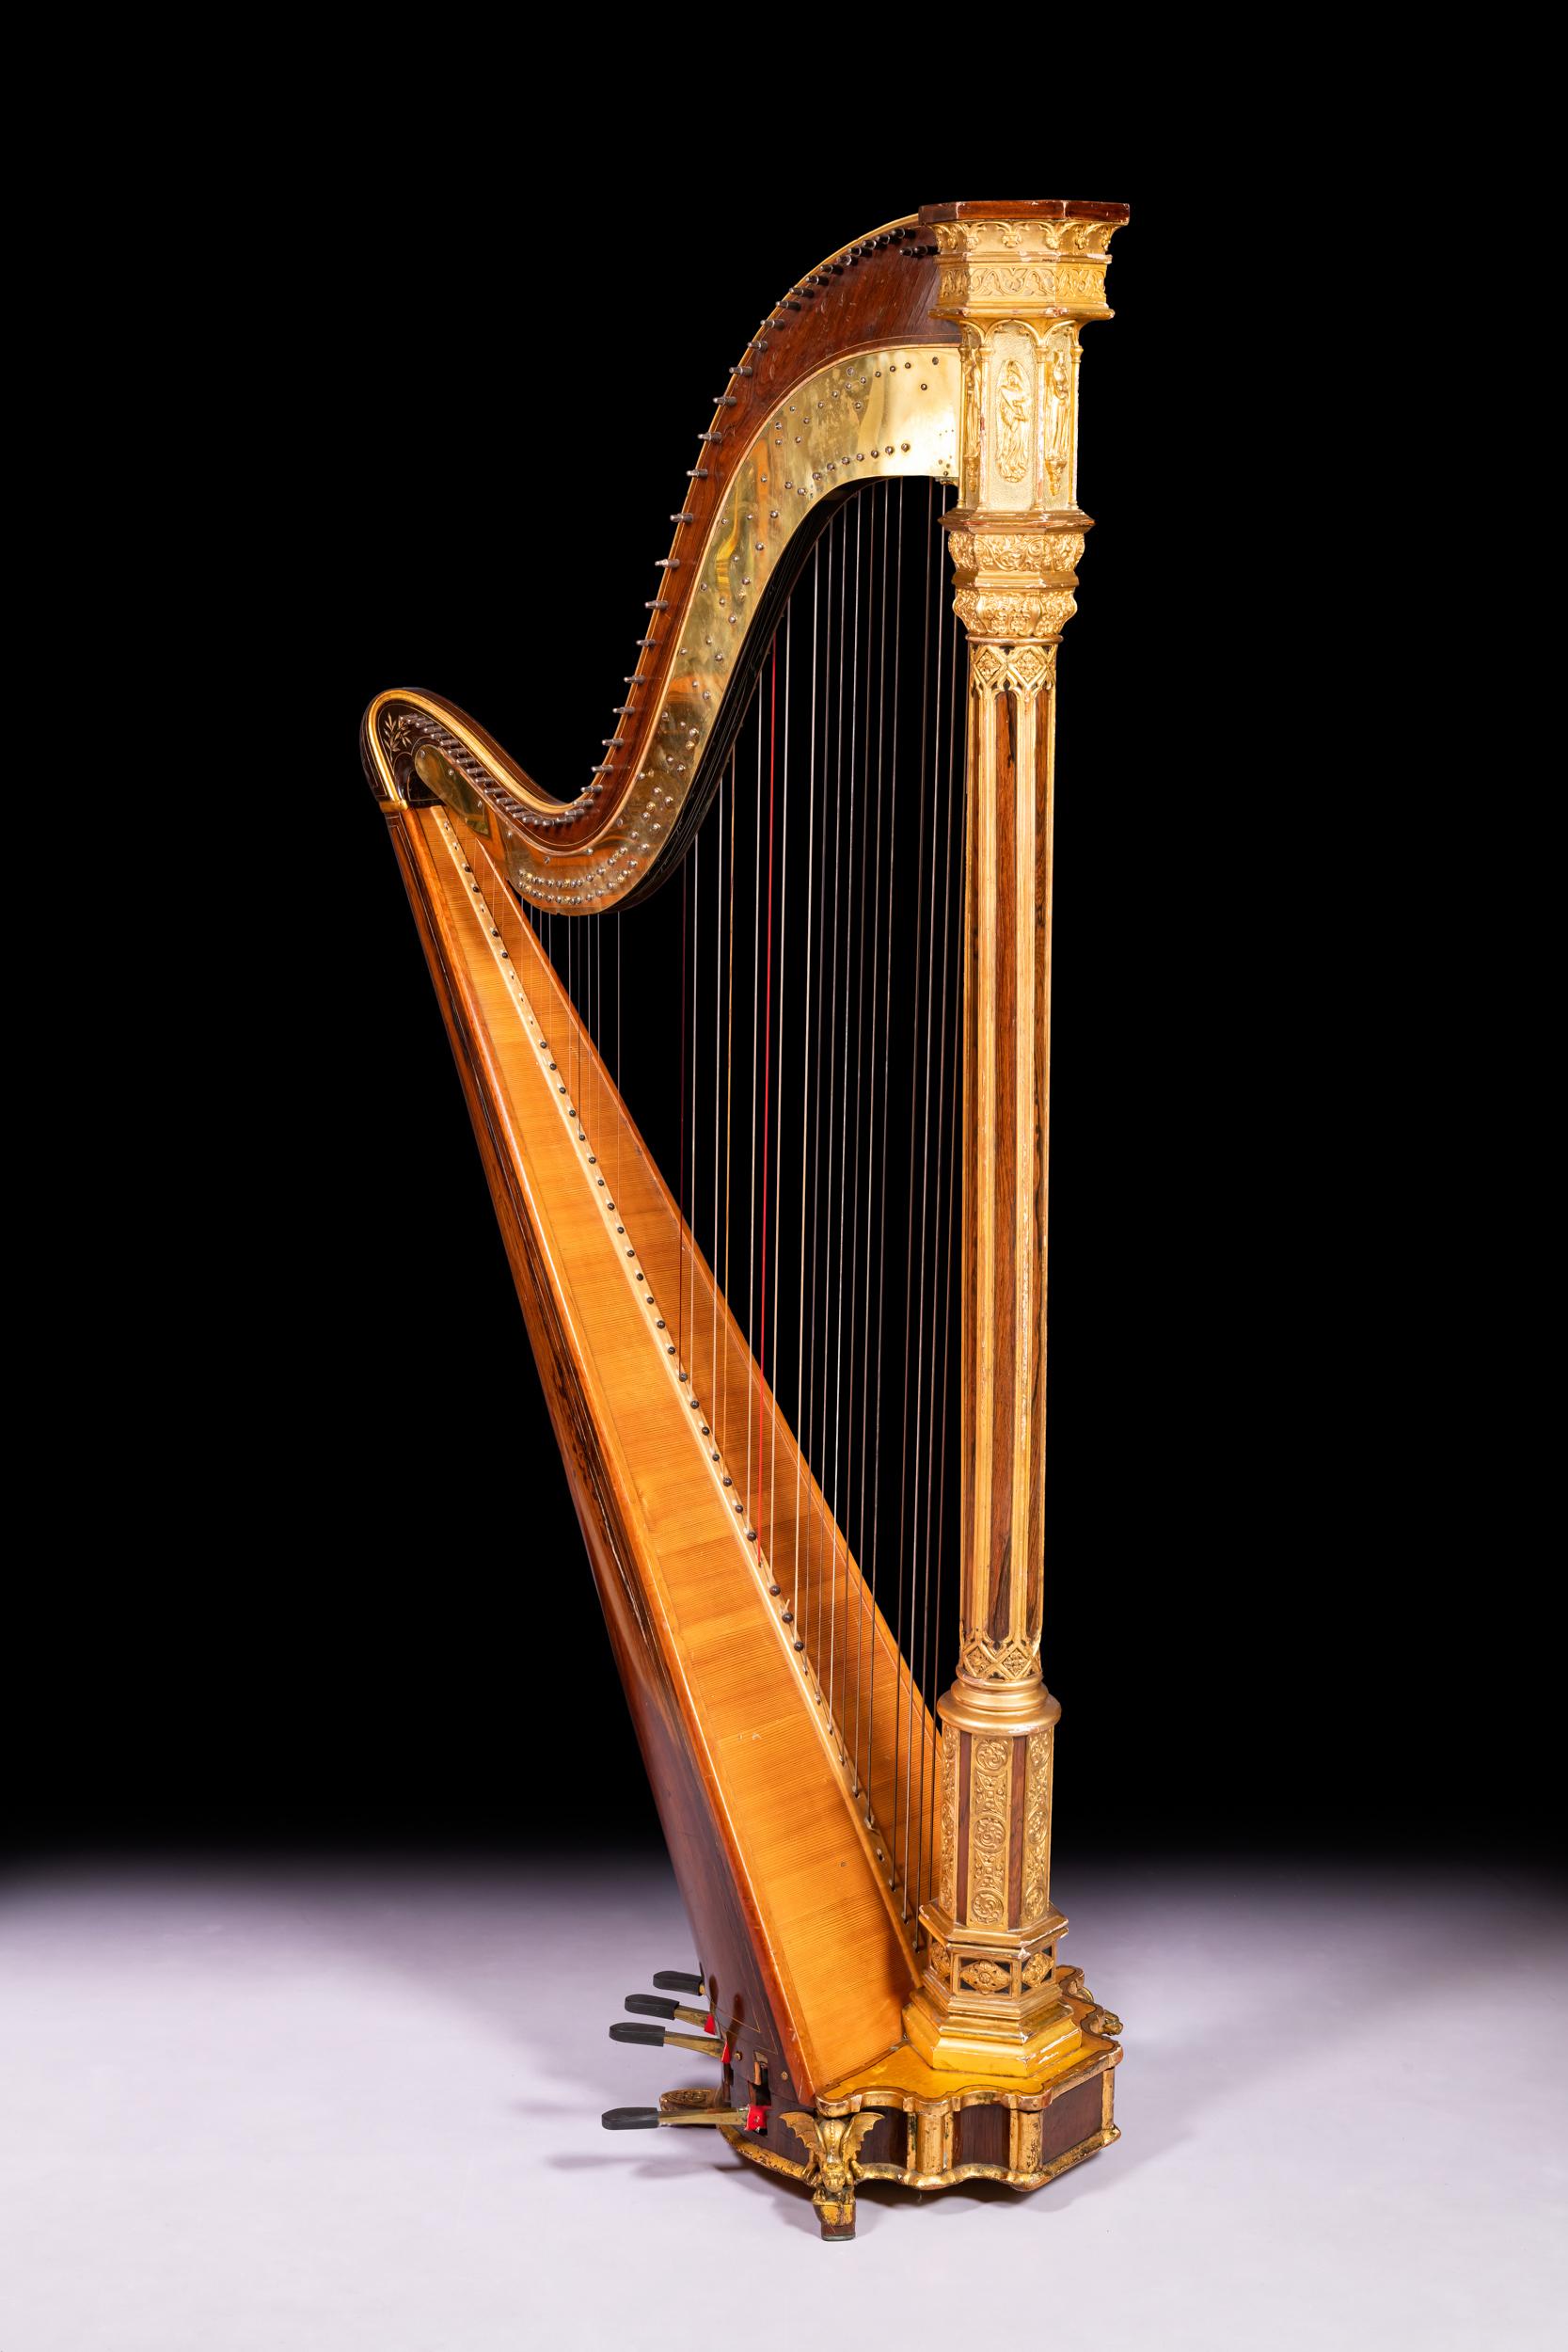 A very fine and elegant Regency Satinwood and parcel-gilt double action Harp from the workshop of the famous harp and piano maker Sebastian Erard (1752-1831), decorated in the Grecian revival manner, inscribed 'Sebastian Erard's/Patent 6599/18 Great